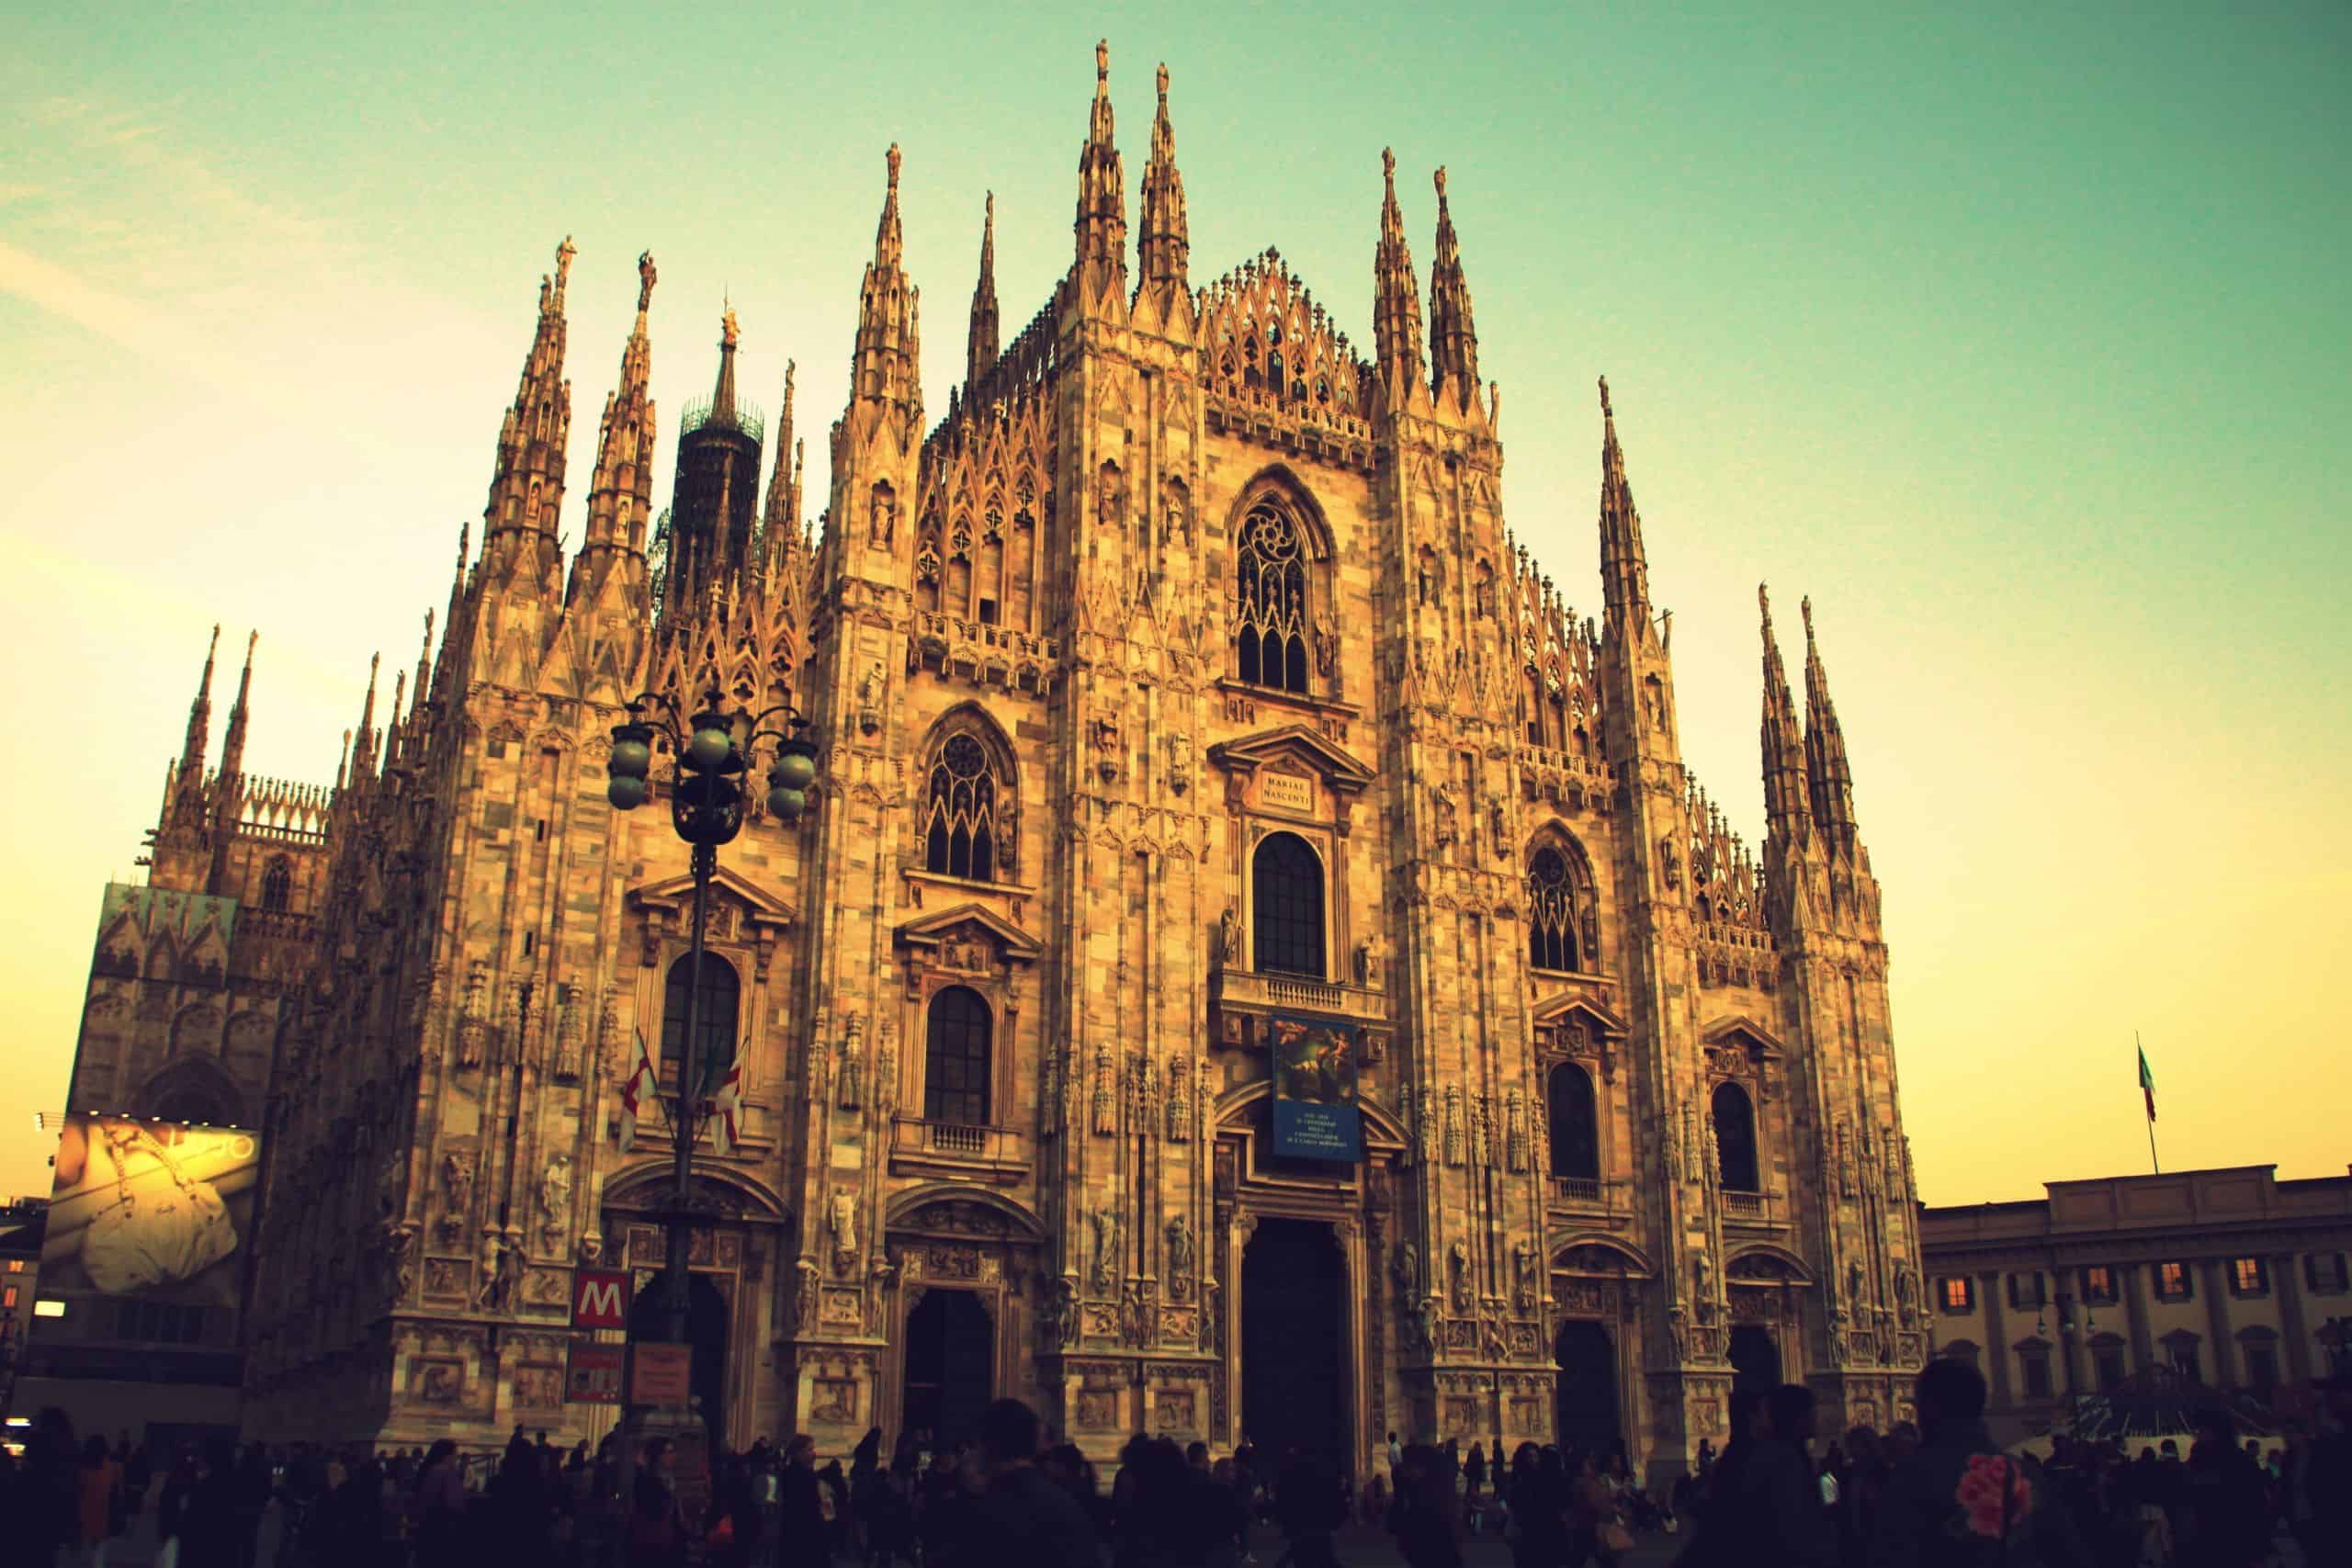 MIlan, Venice, Florence and Rome